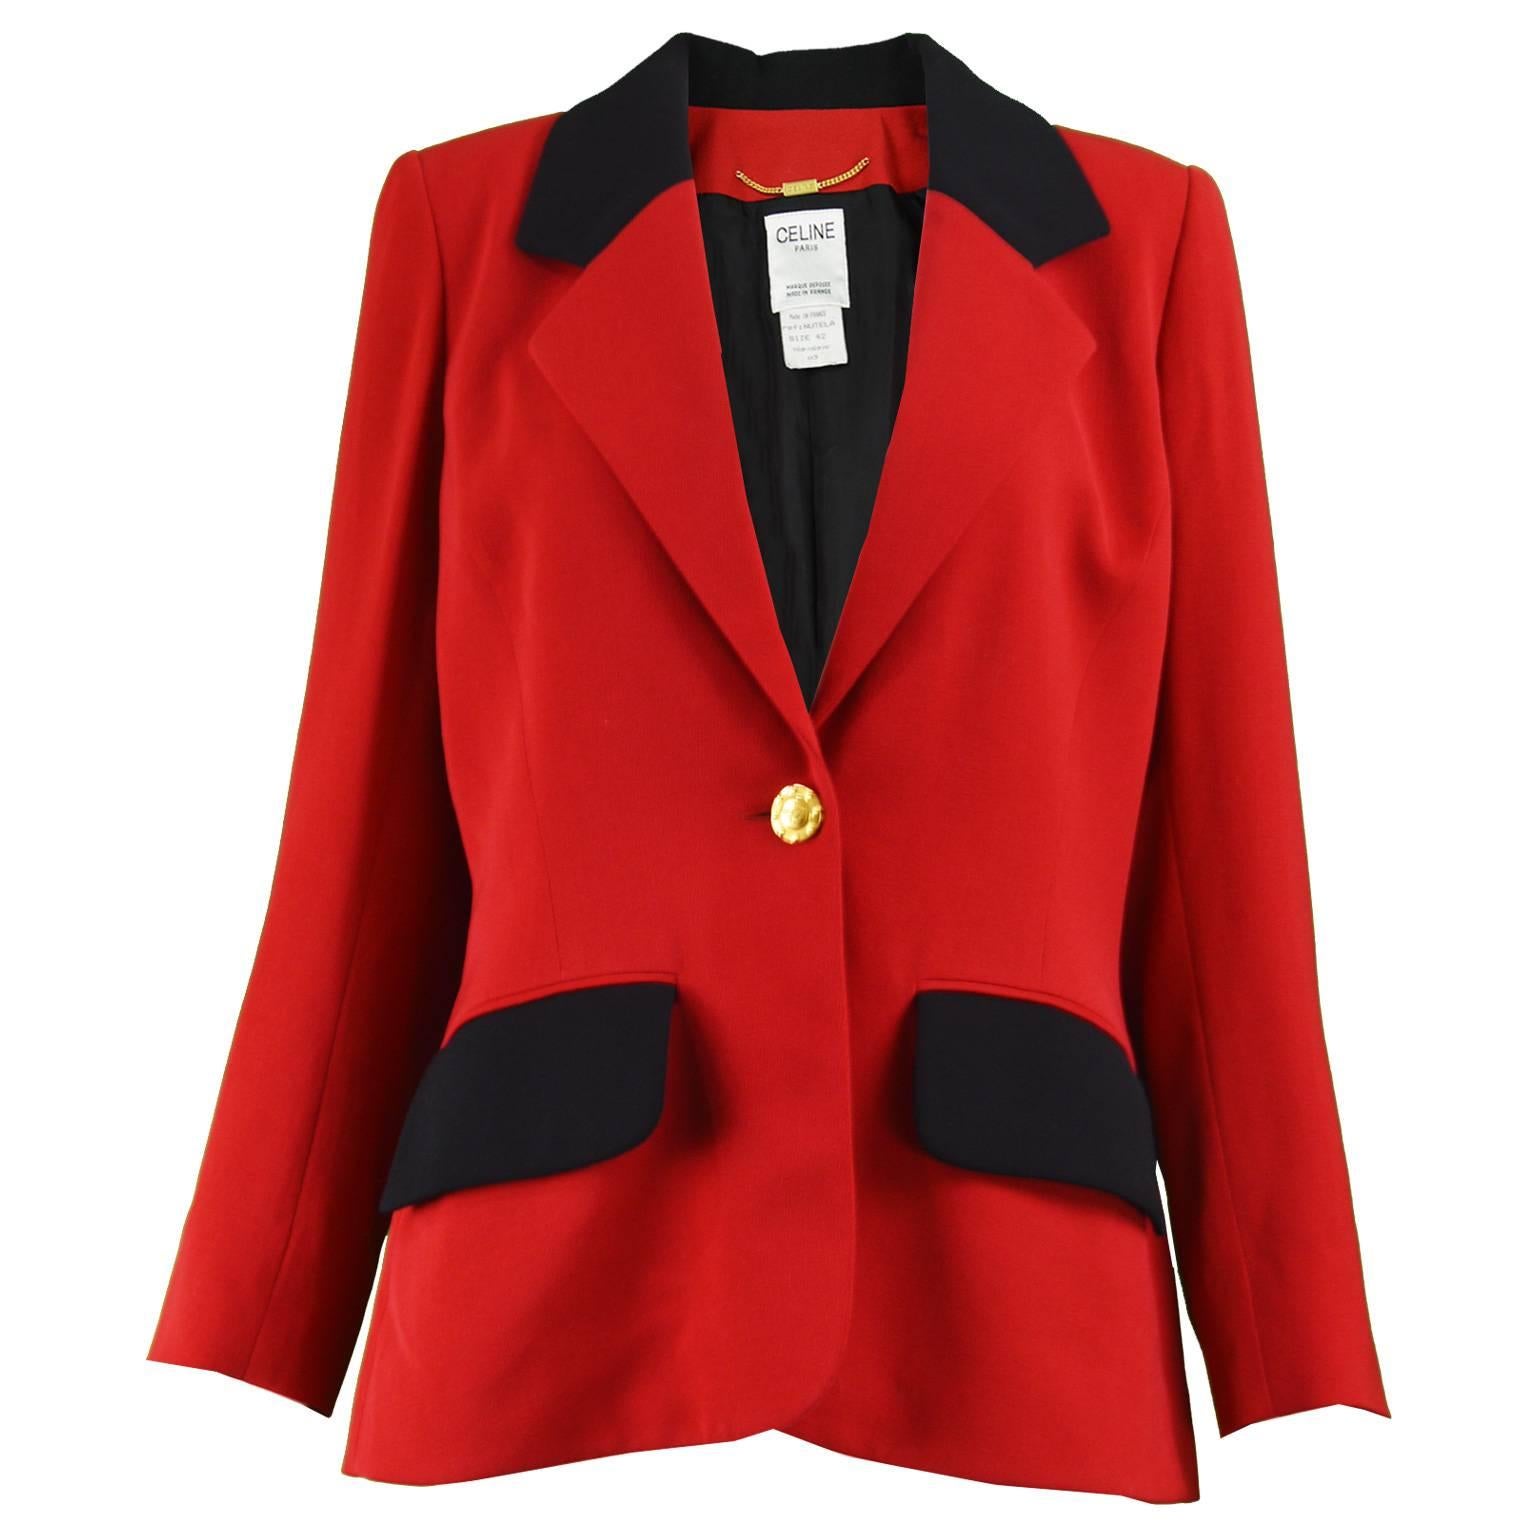 Celine Vintage Red and Black Pure Wool Riding Style Blazer Jacket, 1980s For Sale